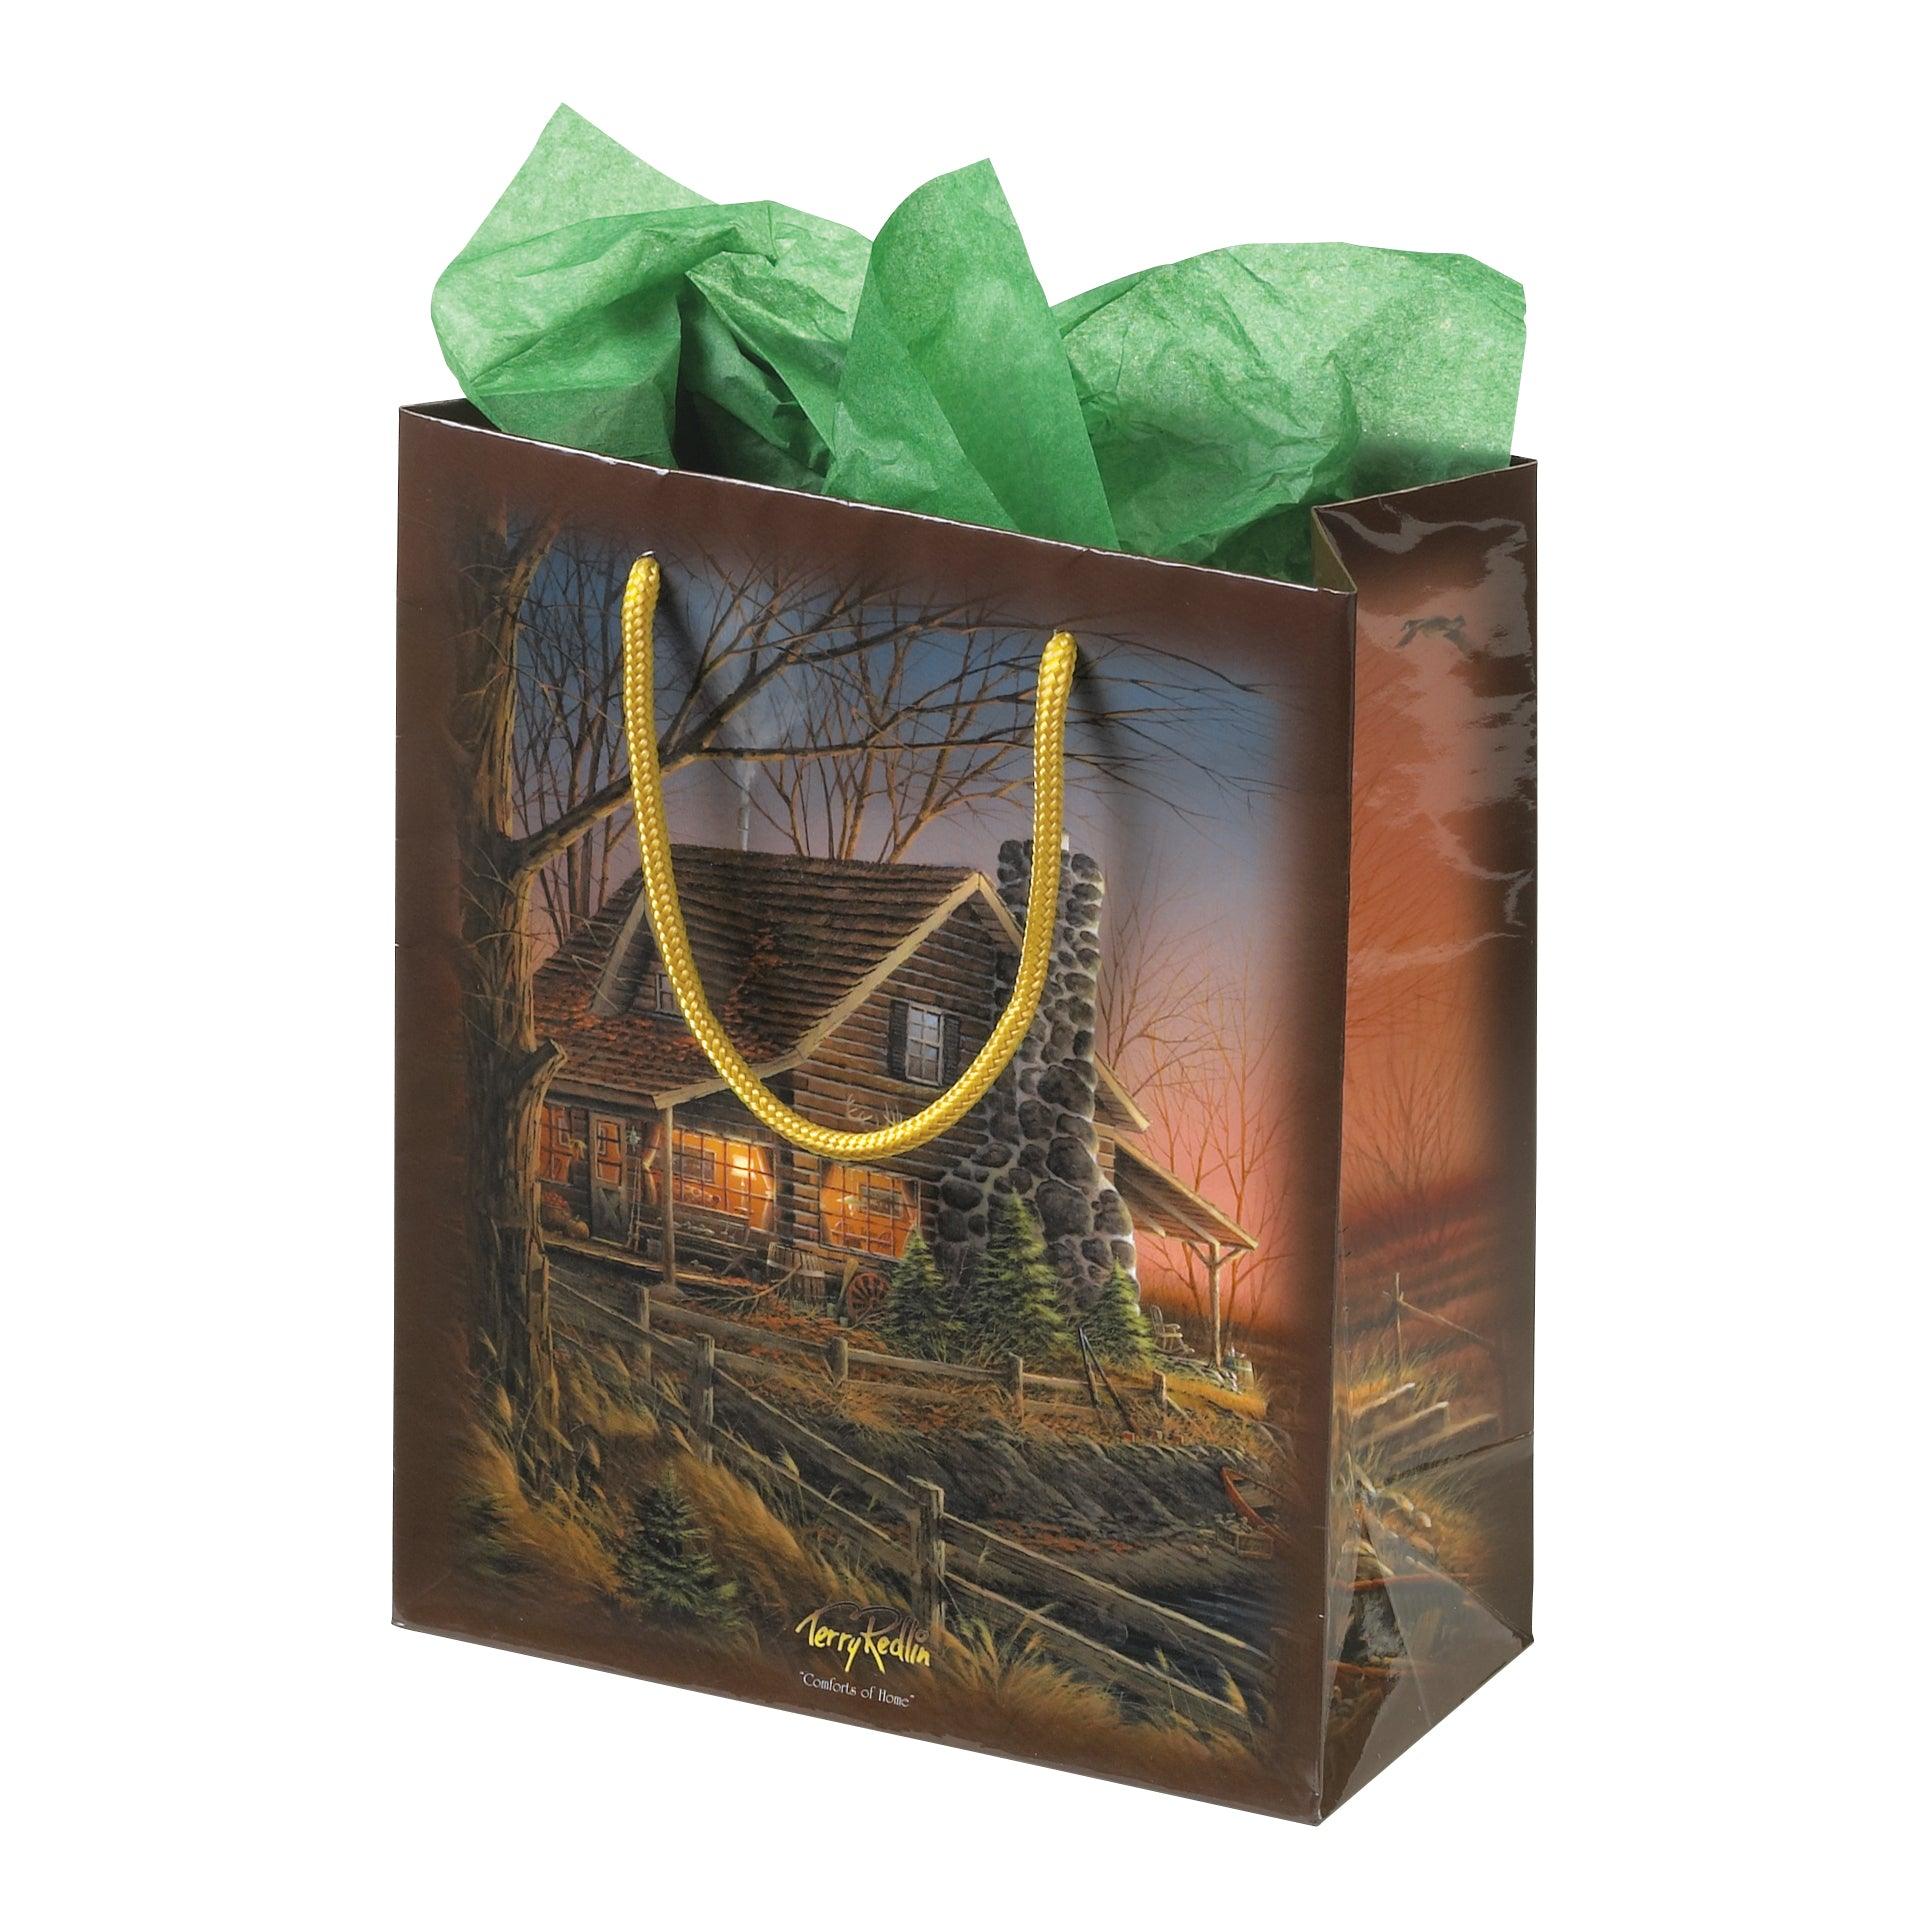 Comforts of Home Small Gift Bags - Wild Wings